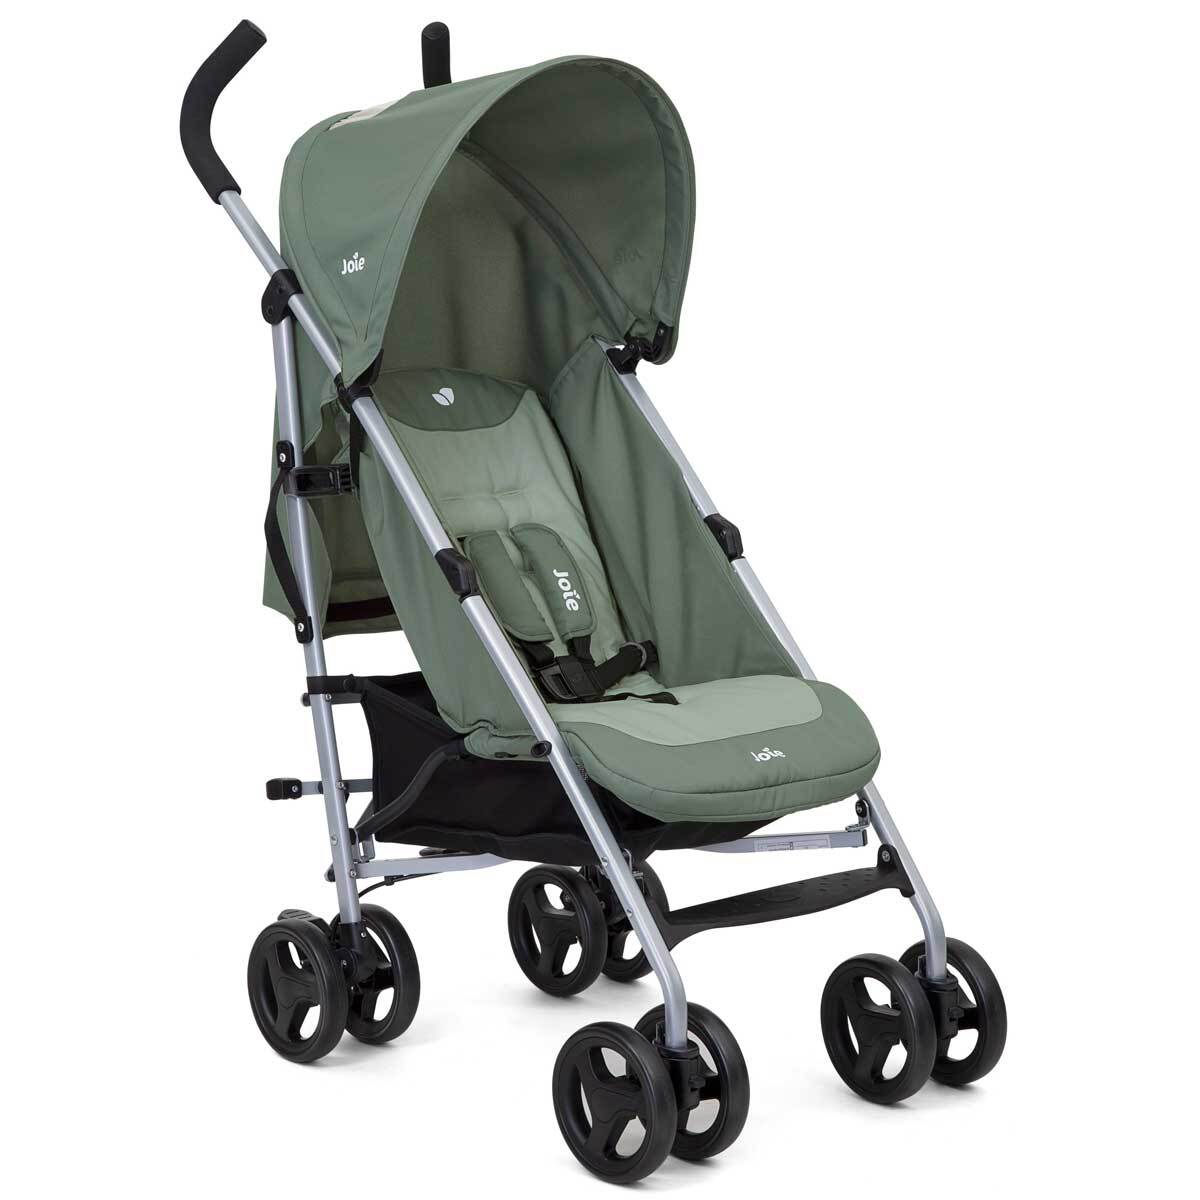 Joie Nitro in Laurel Umbrella Buggy Stroller | Early Learning Centre